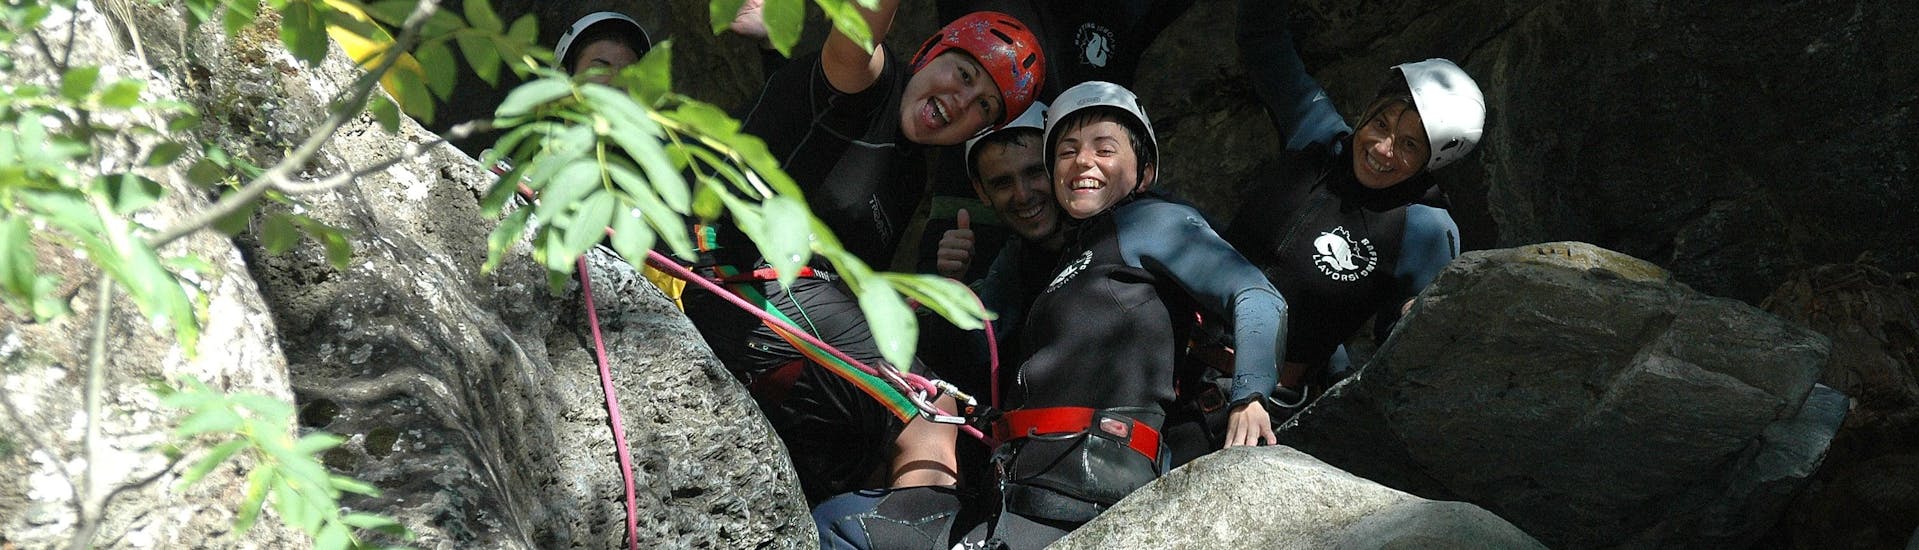 A group of friends goes canyoning in Barranco de Berrós with Rafting Llavorsí.